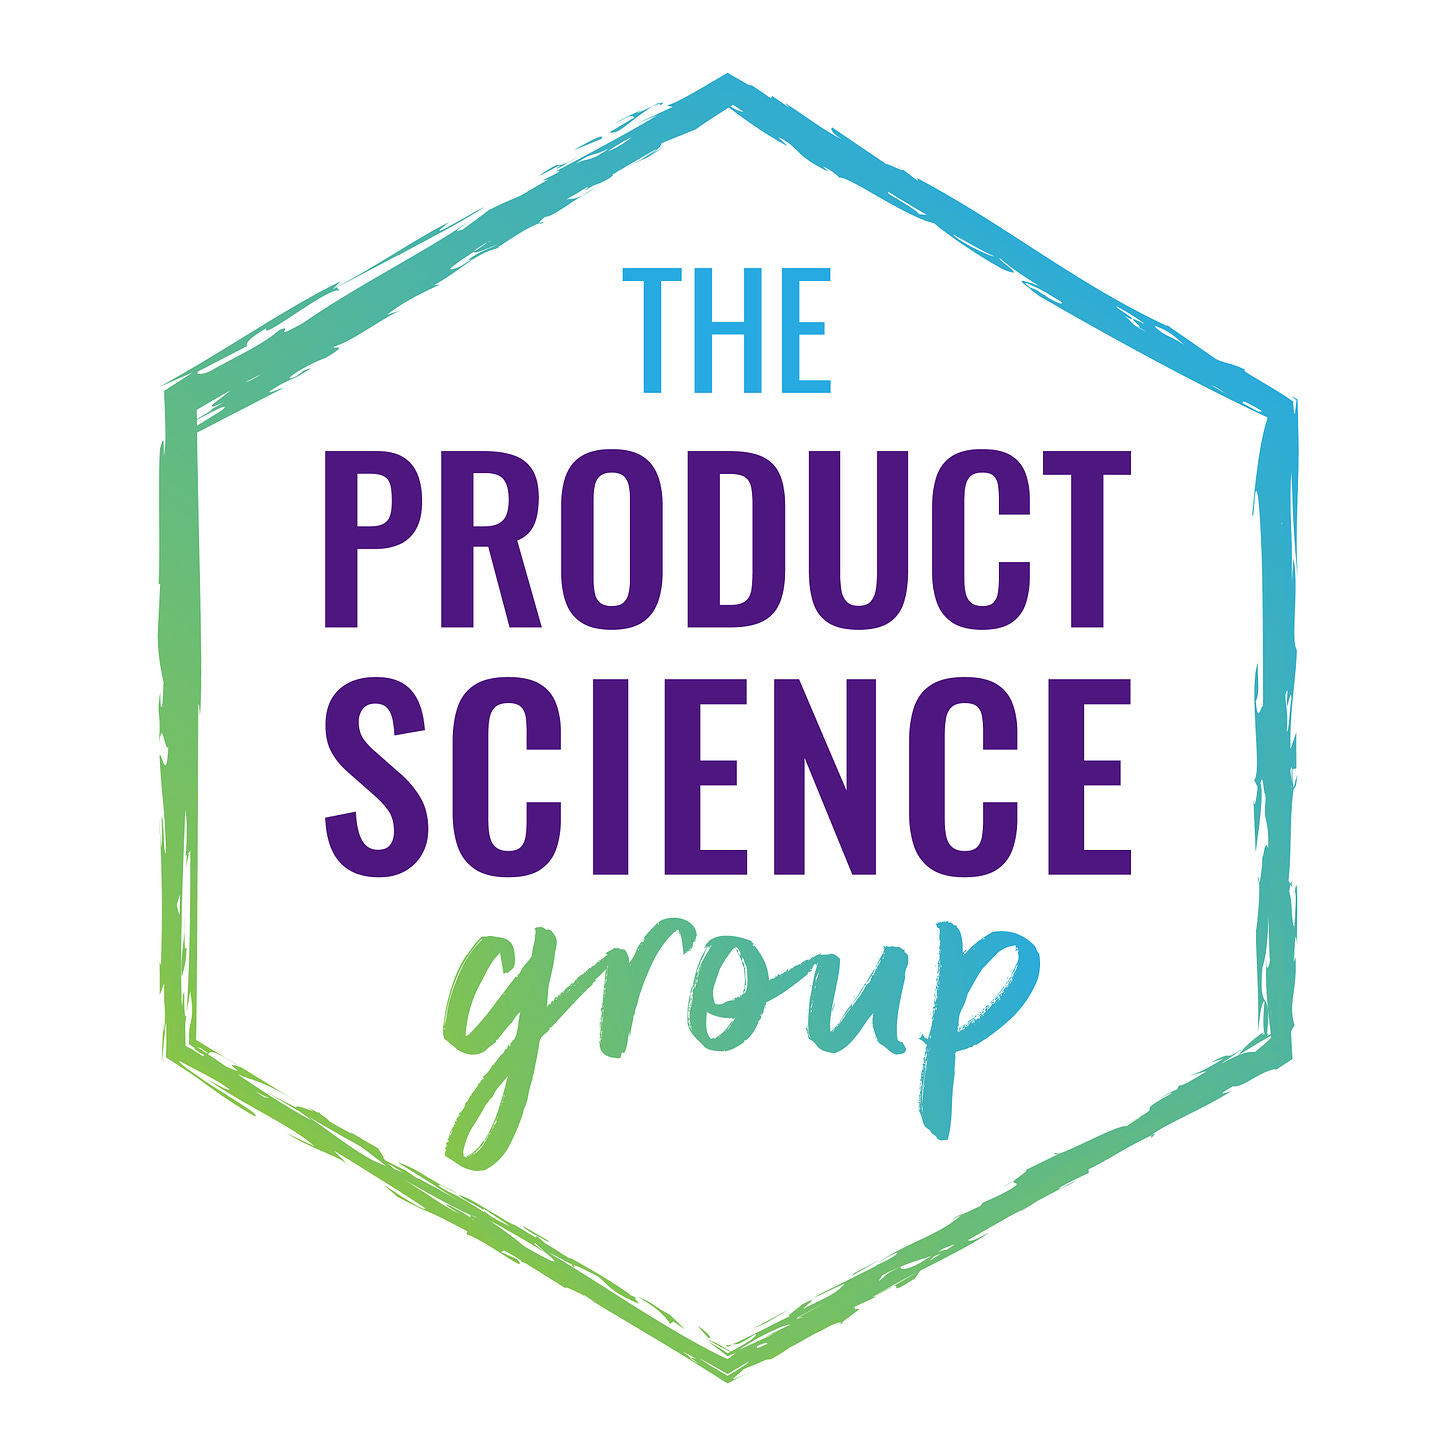 The Product Science Group words framed by a hexagon